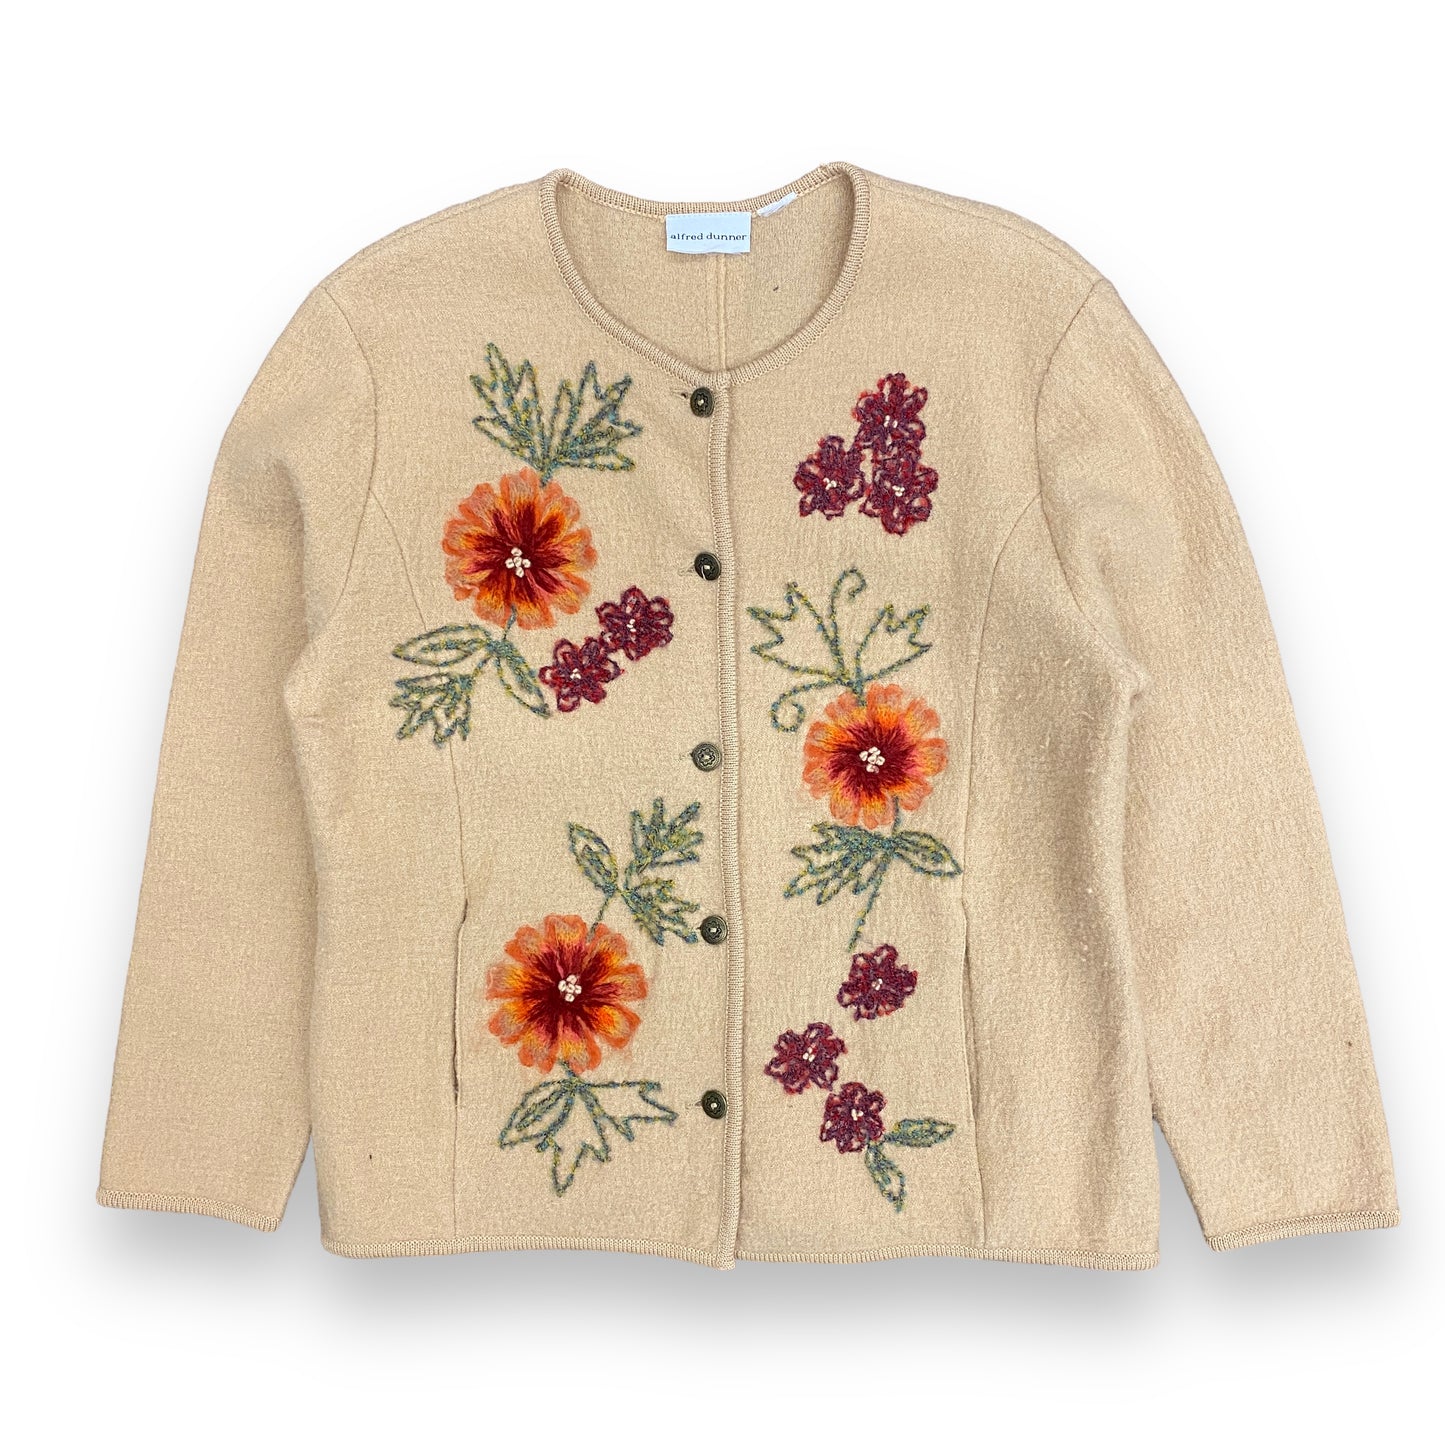 Vintage Floral Embroidered Tan Wool Sweater - Size Medium